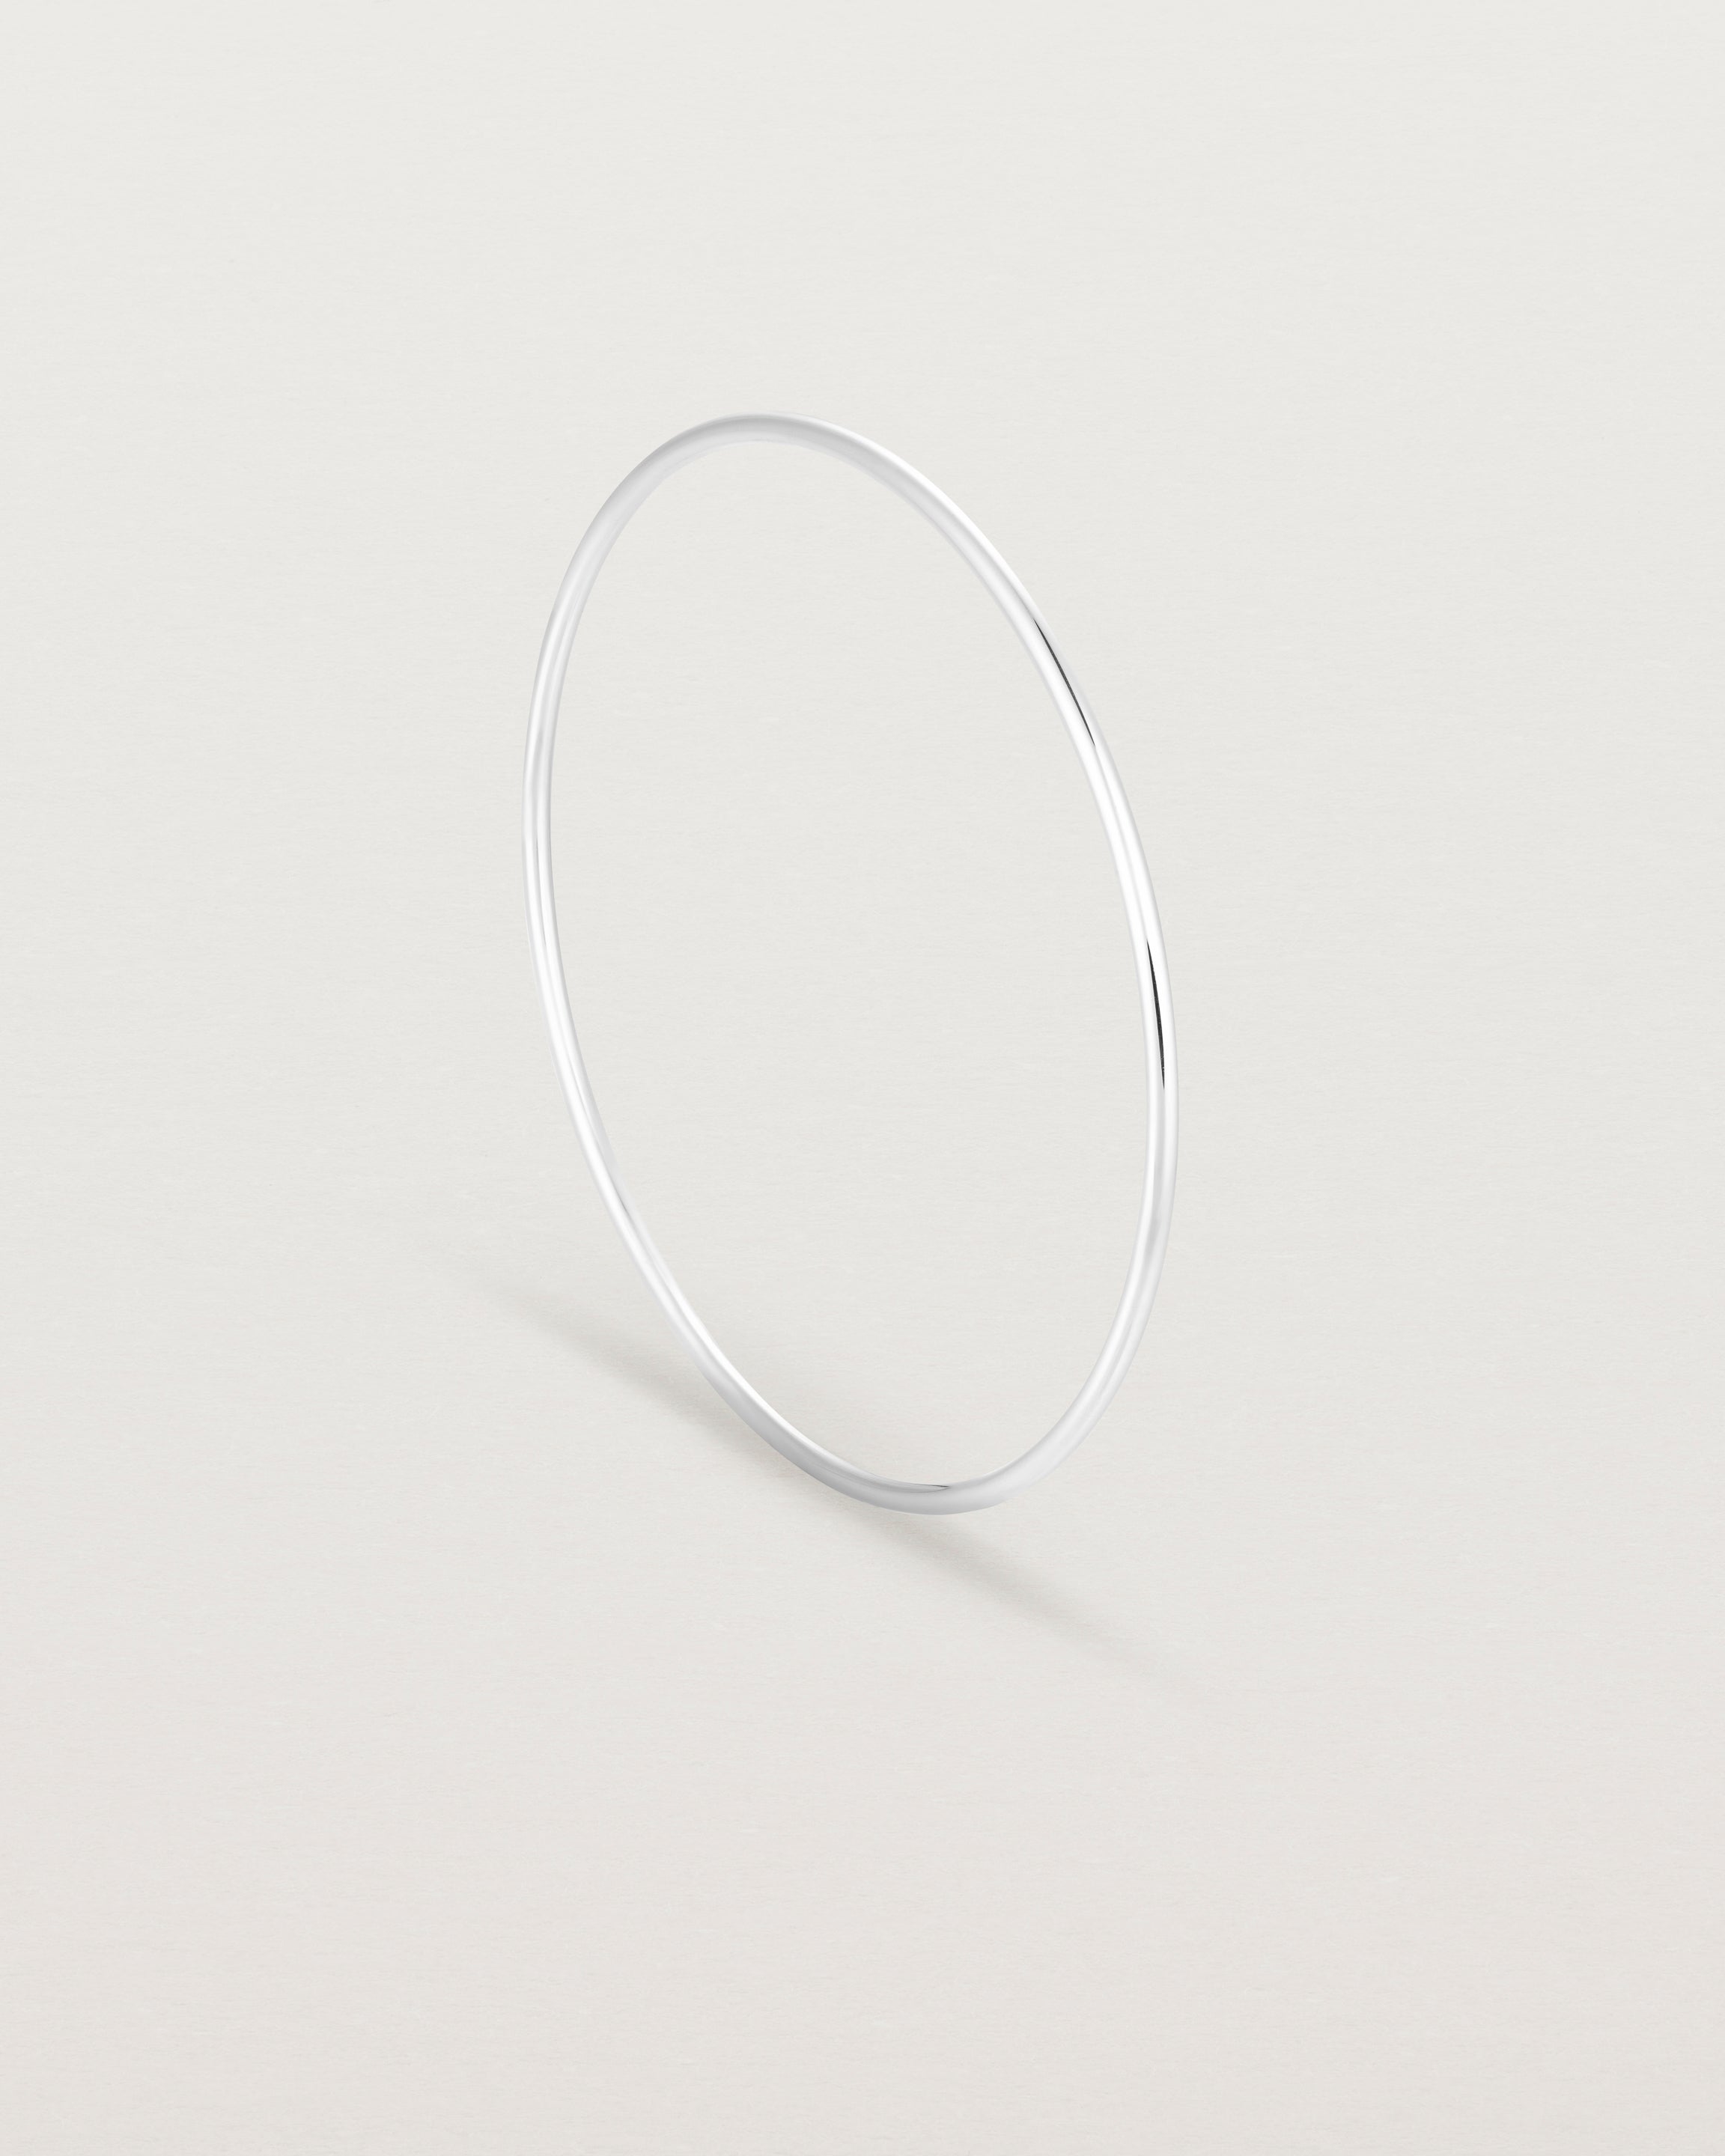 Standing view of the Oval Bangle in White Gold.